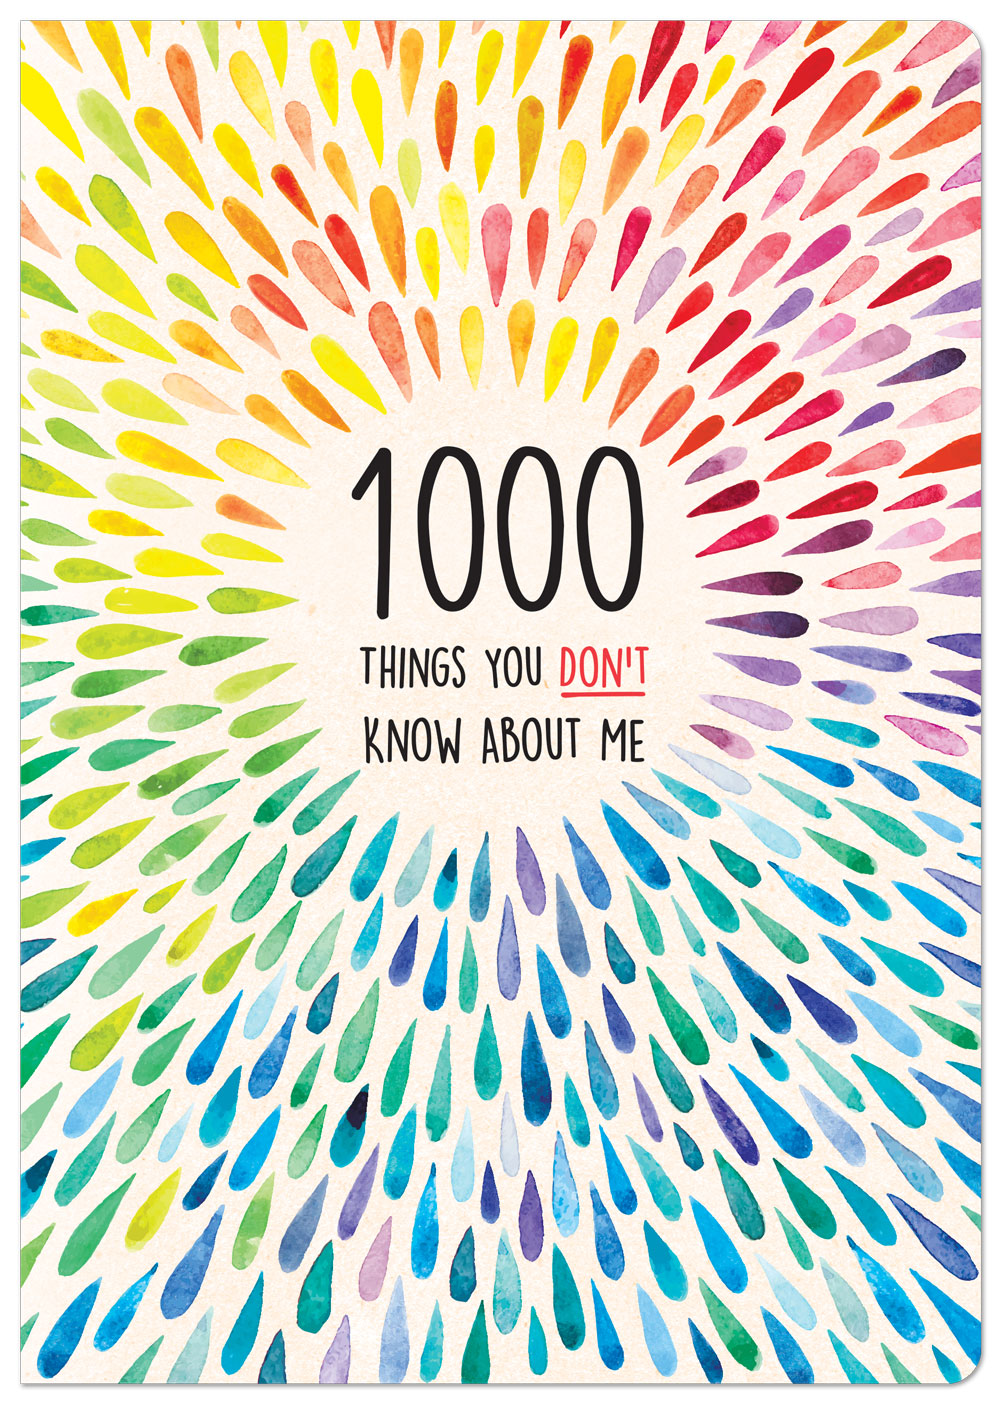 1000 Things You Dont Know About Me